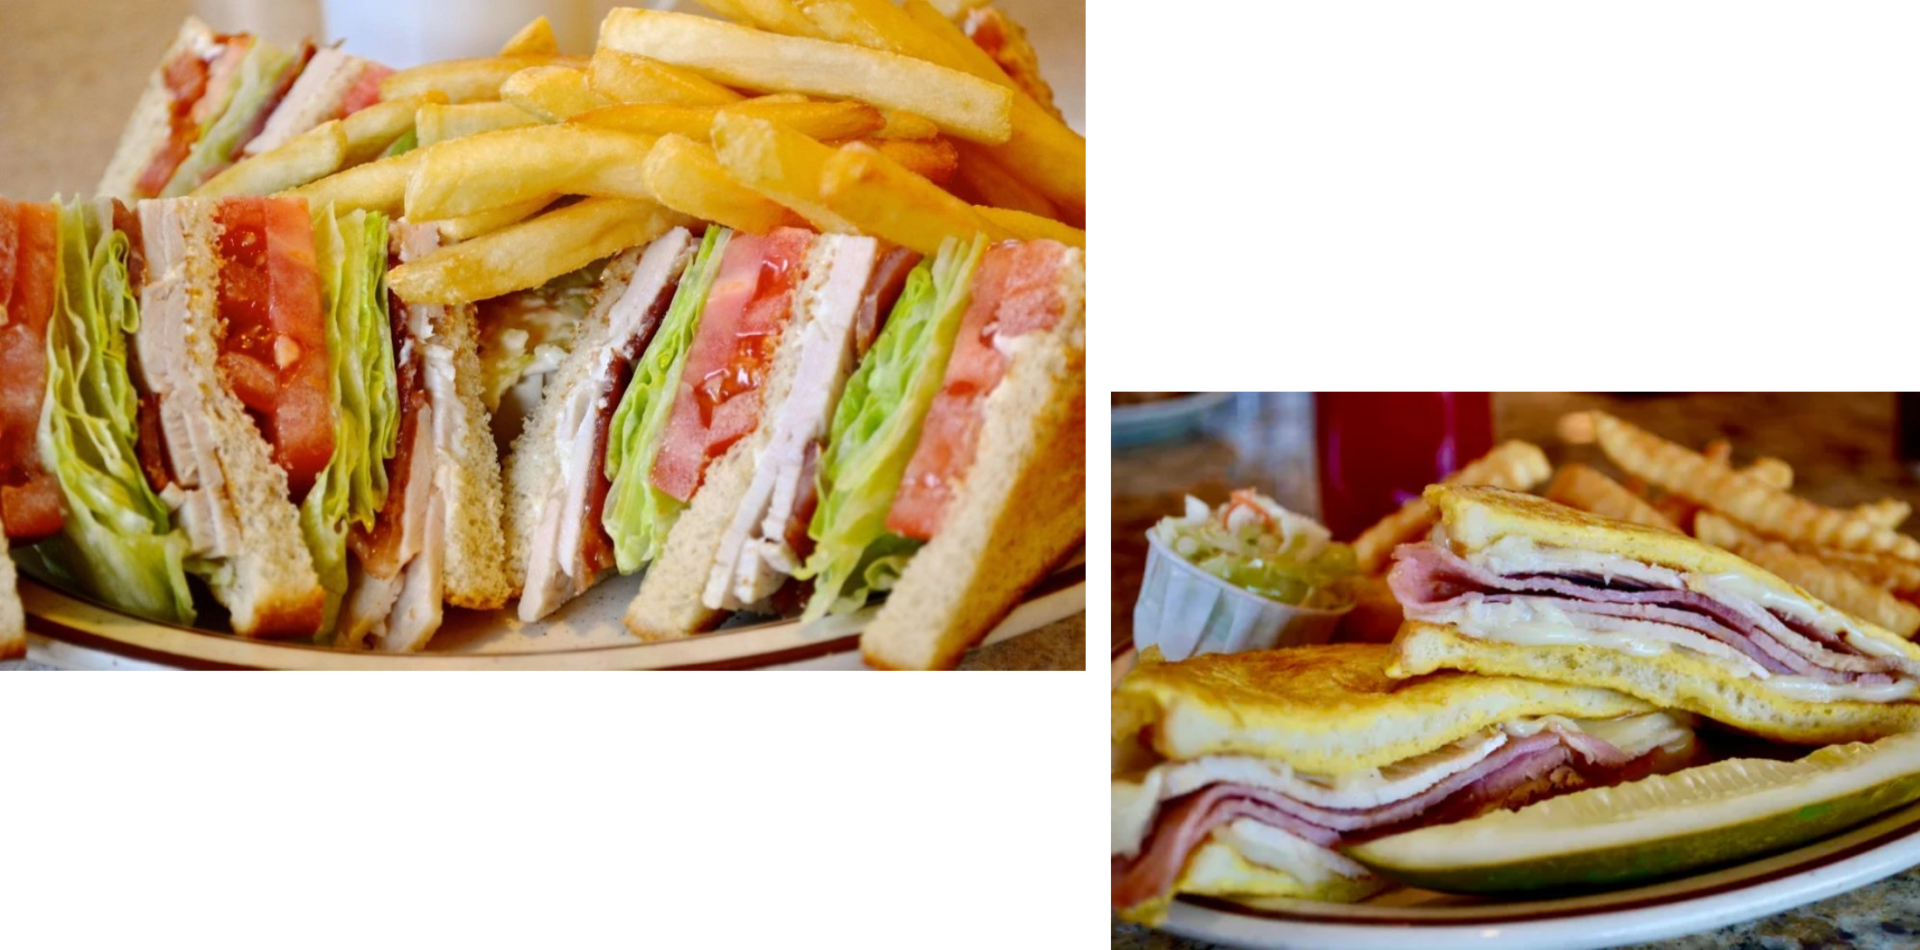 A sandwich and french fries are shown.